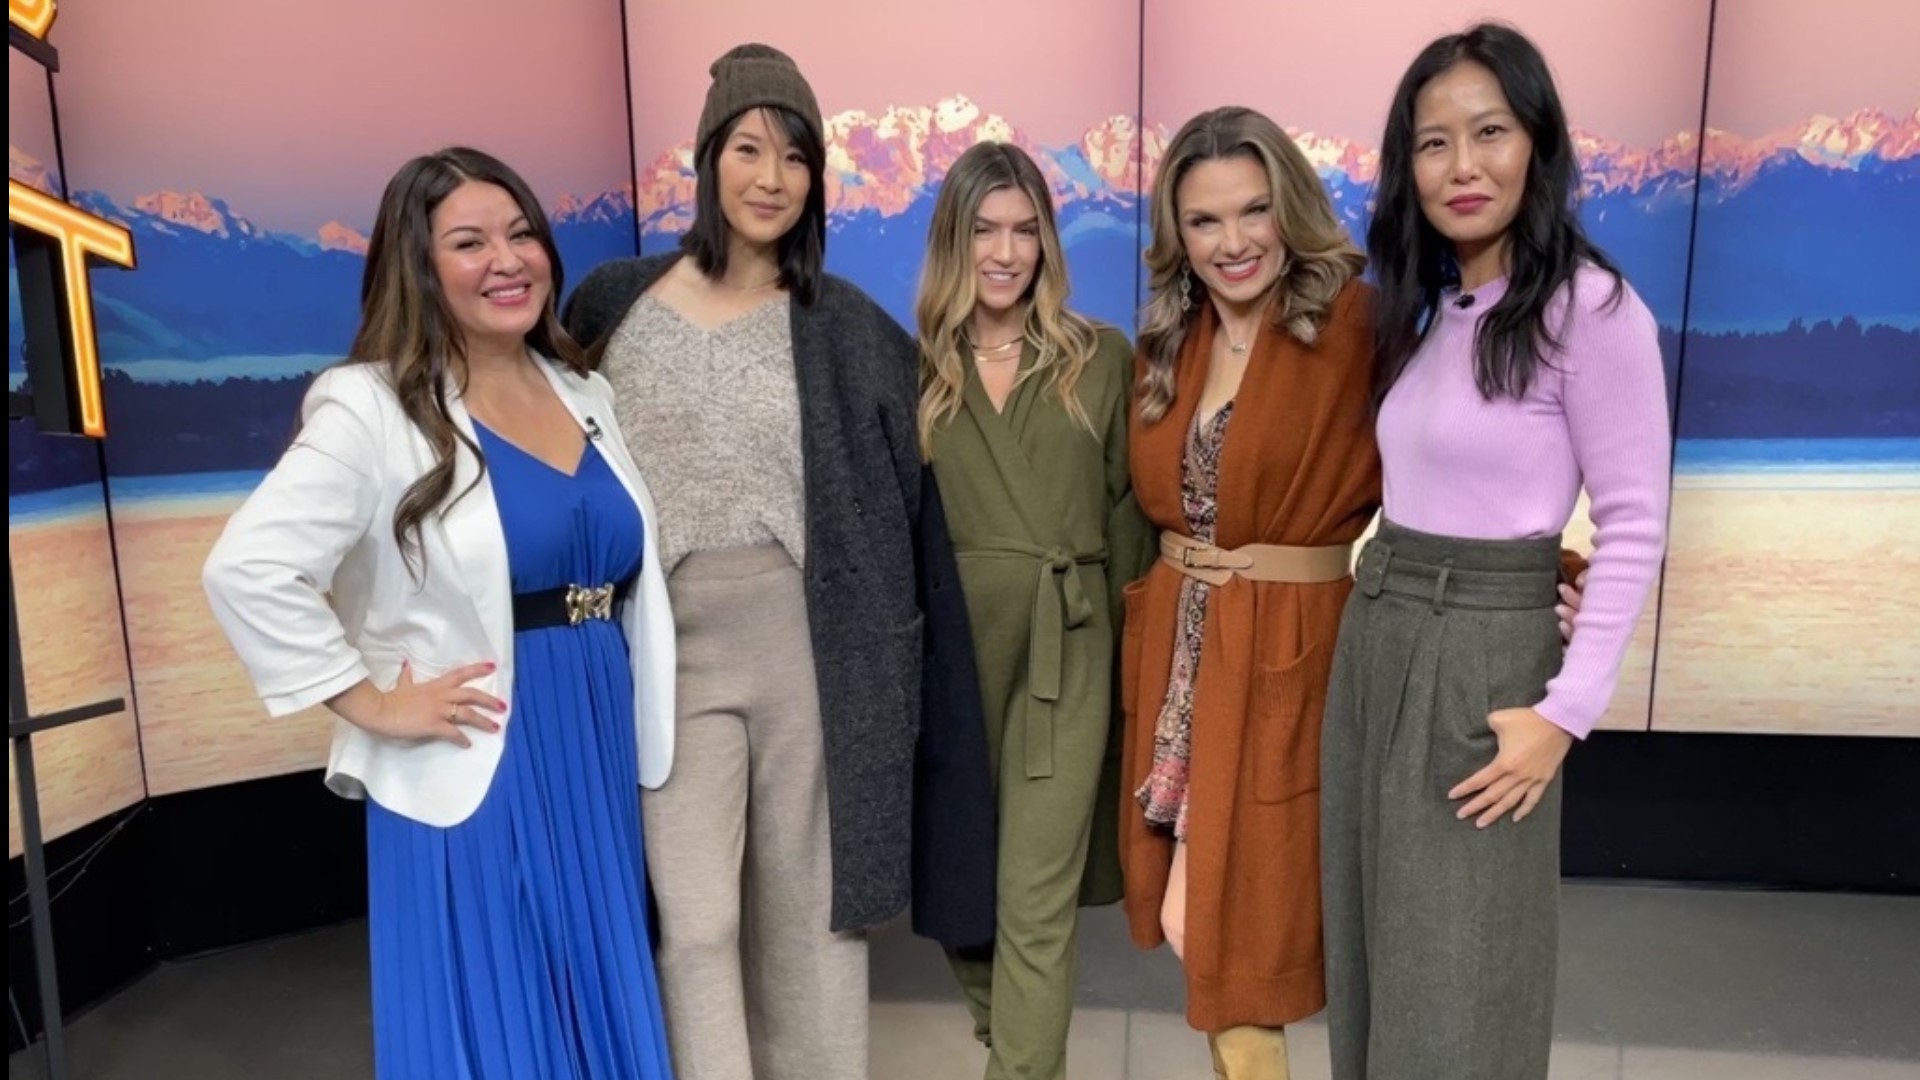 Designer Elisa Yip and fashion publicist Sydney Mintle joined the show to talk about their upcoming panel discussion at Bellevue Fashion Week. #newdaynw